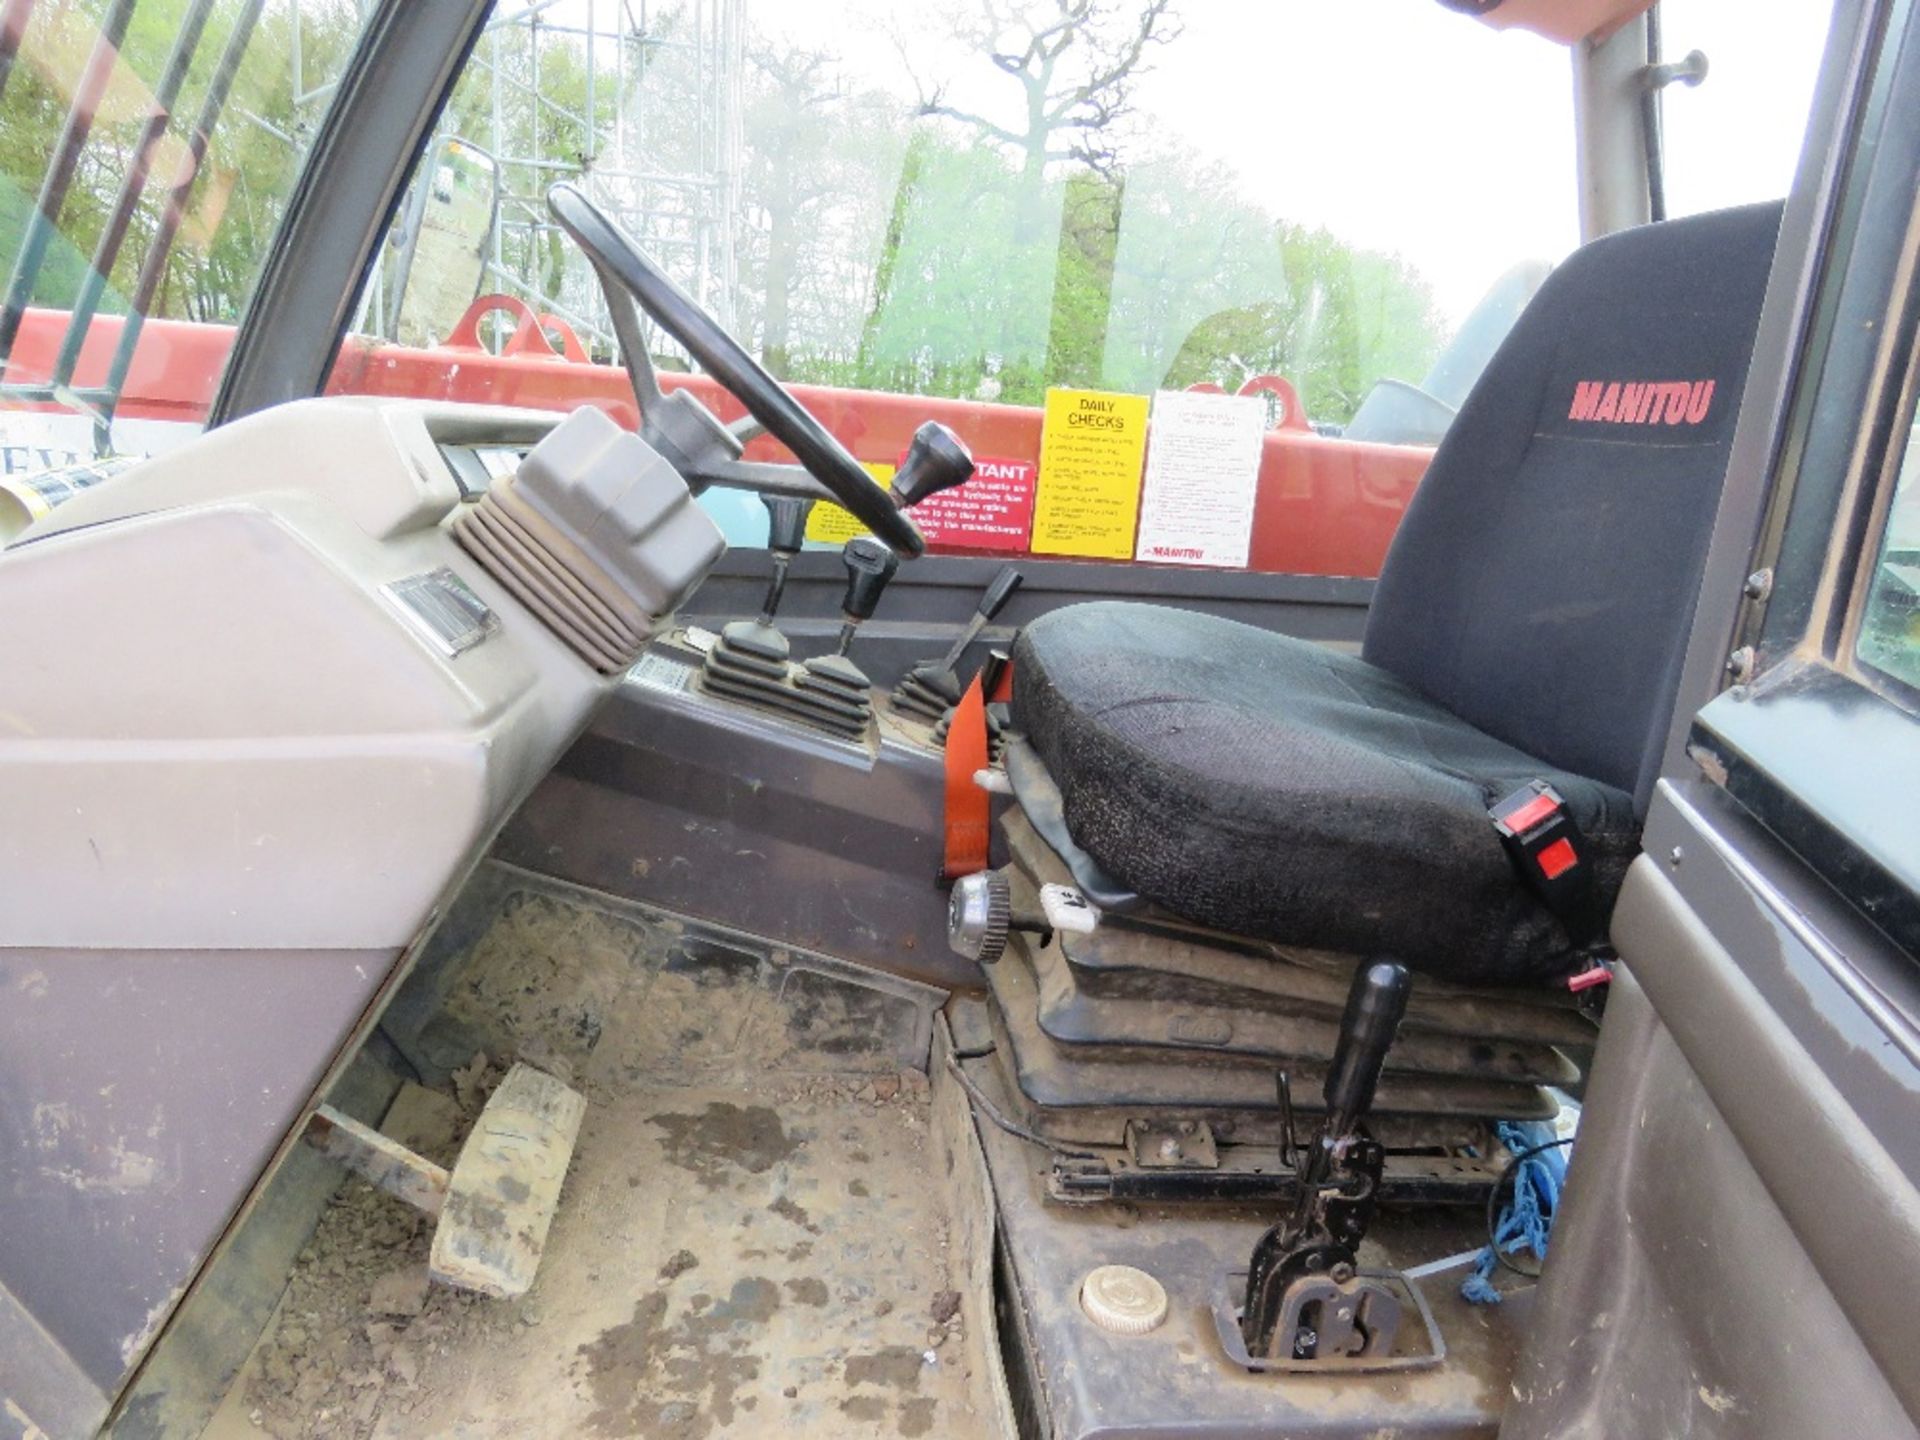 MANITOU 1435SL TELESCOPIC HANDLER REG:LU06 MRO (LOG BOOK TO APPLY FOR). 7965 REC HRS. YEAR 2006 BUIL - Image 8 of 14